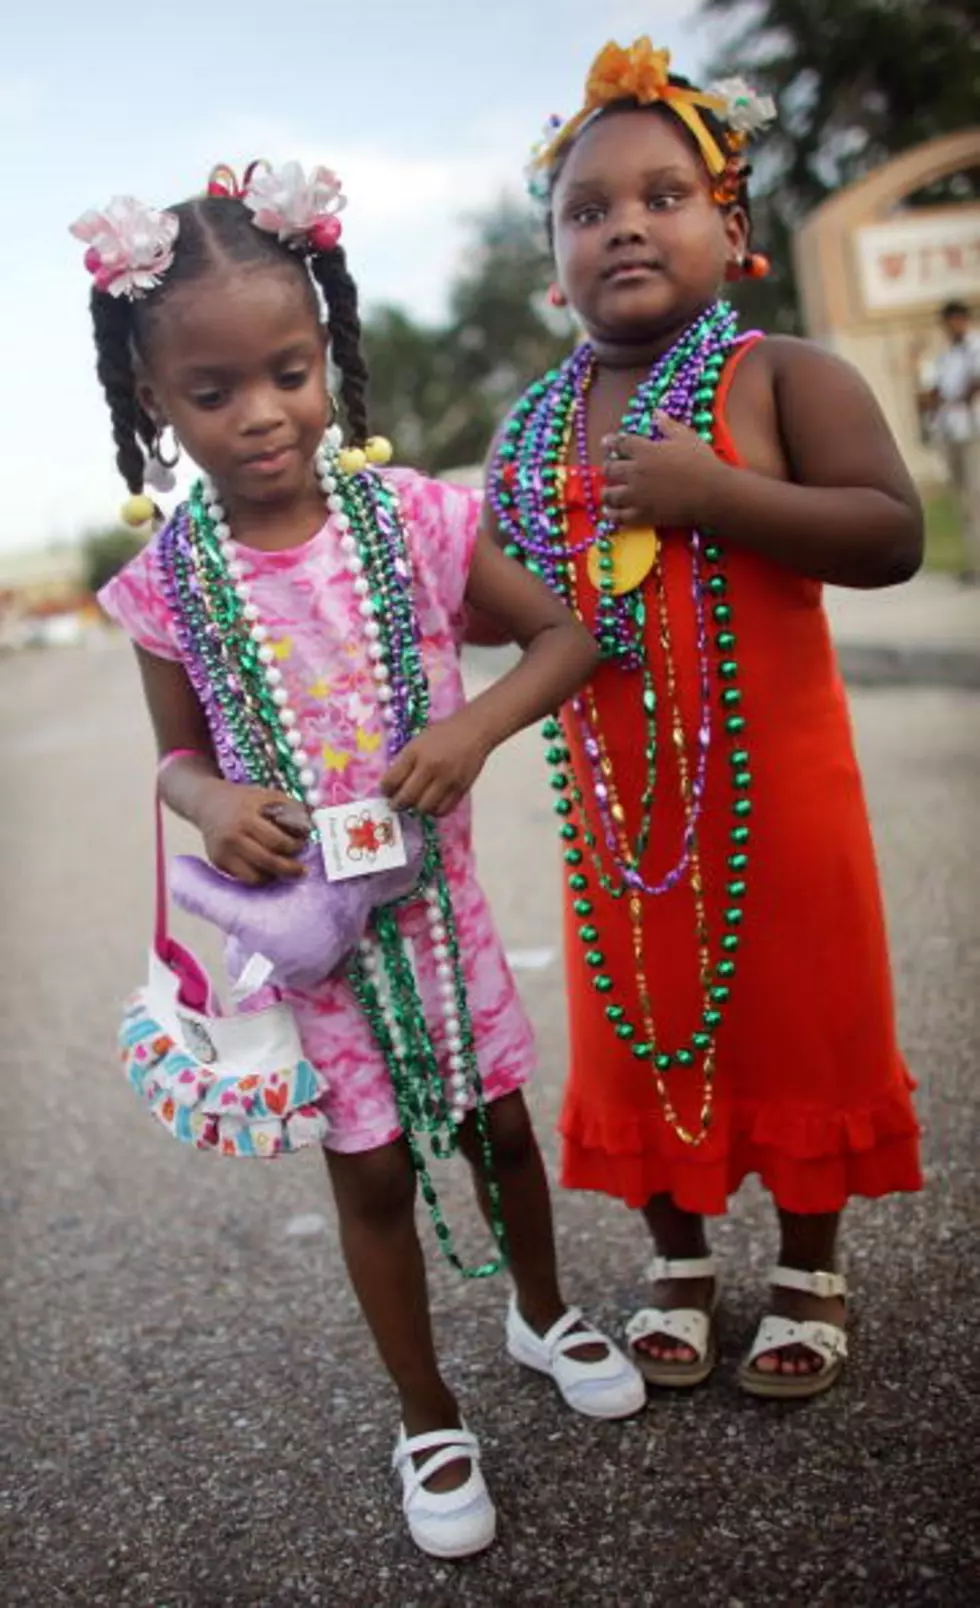 Children’s Day/Mardi Gras Parade & Lighted Boat Parade